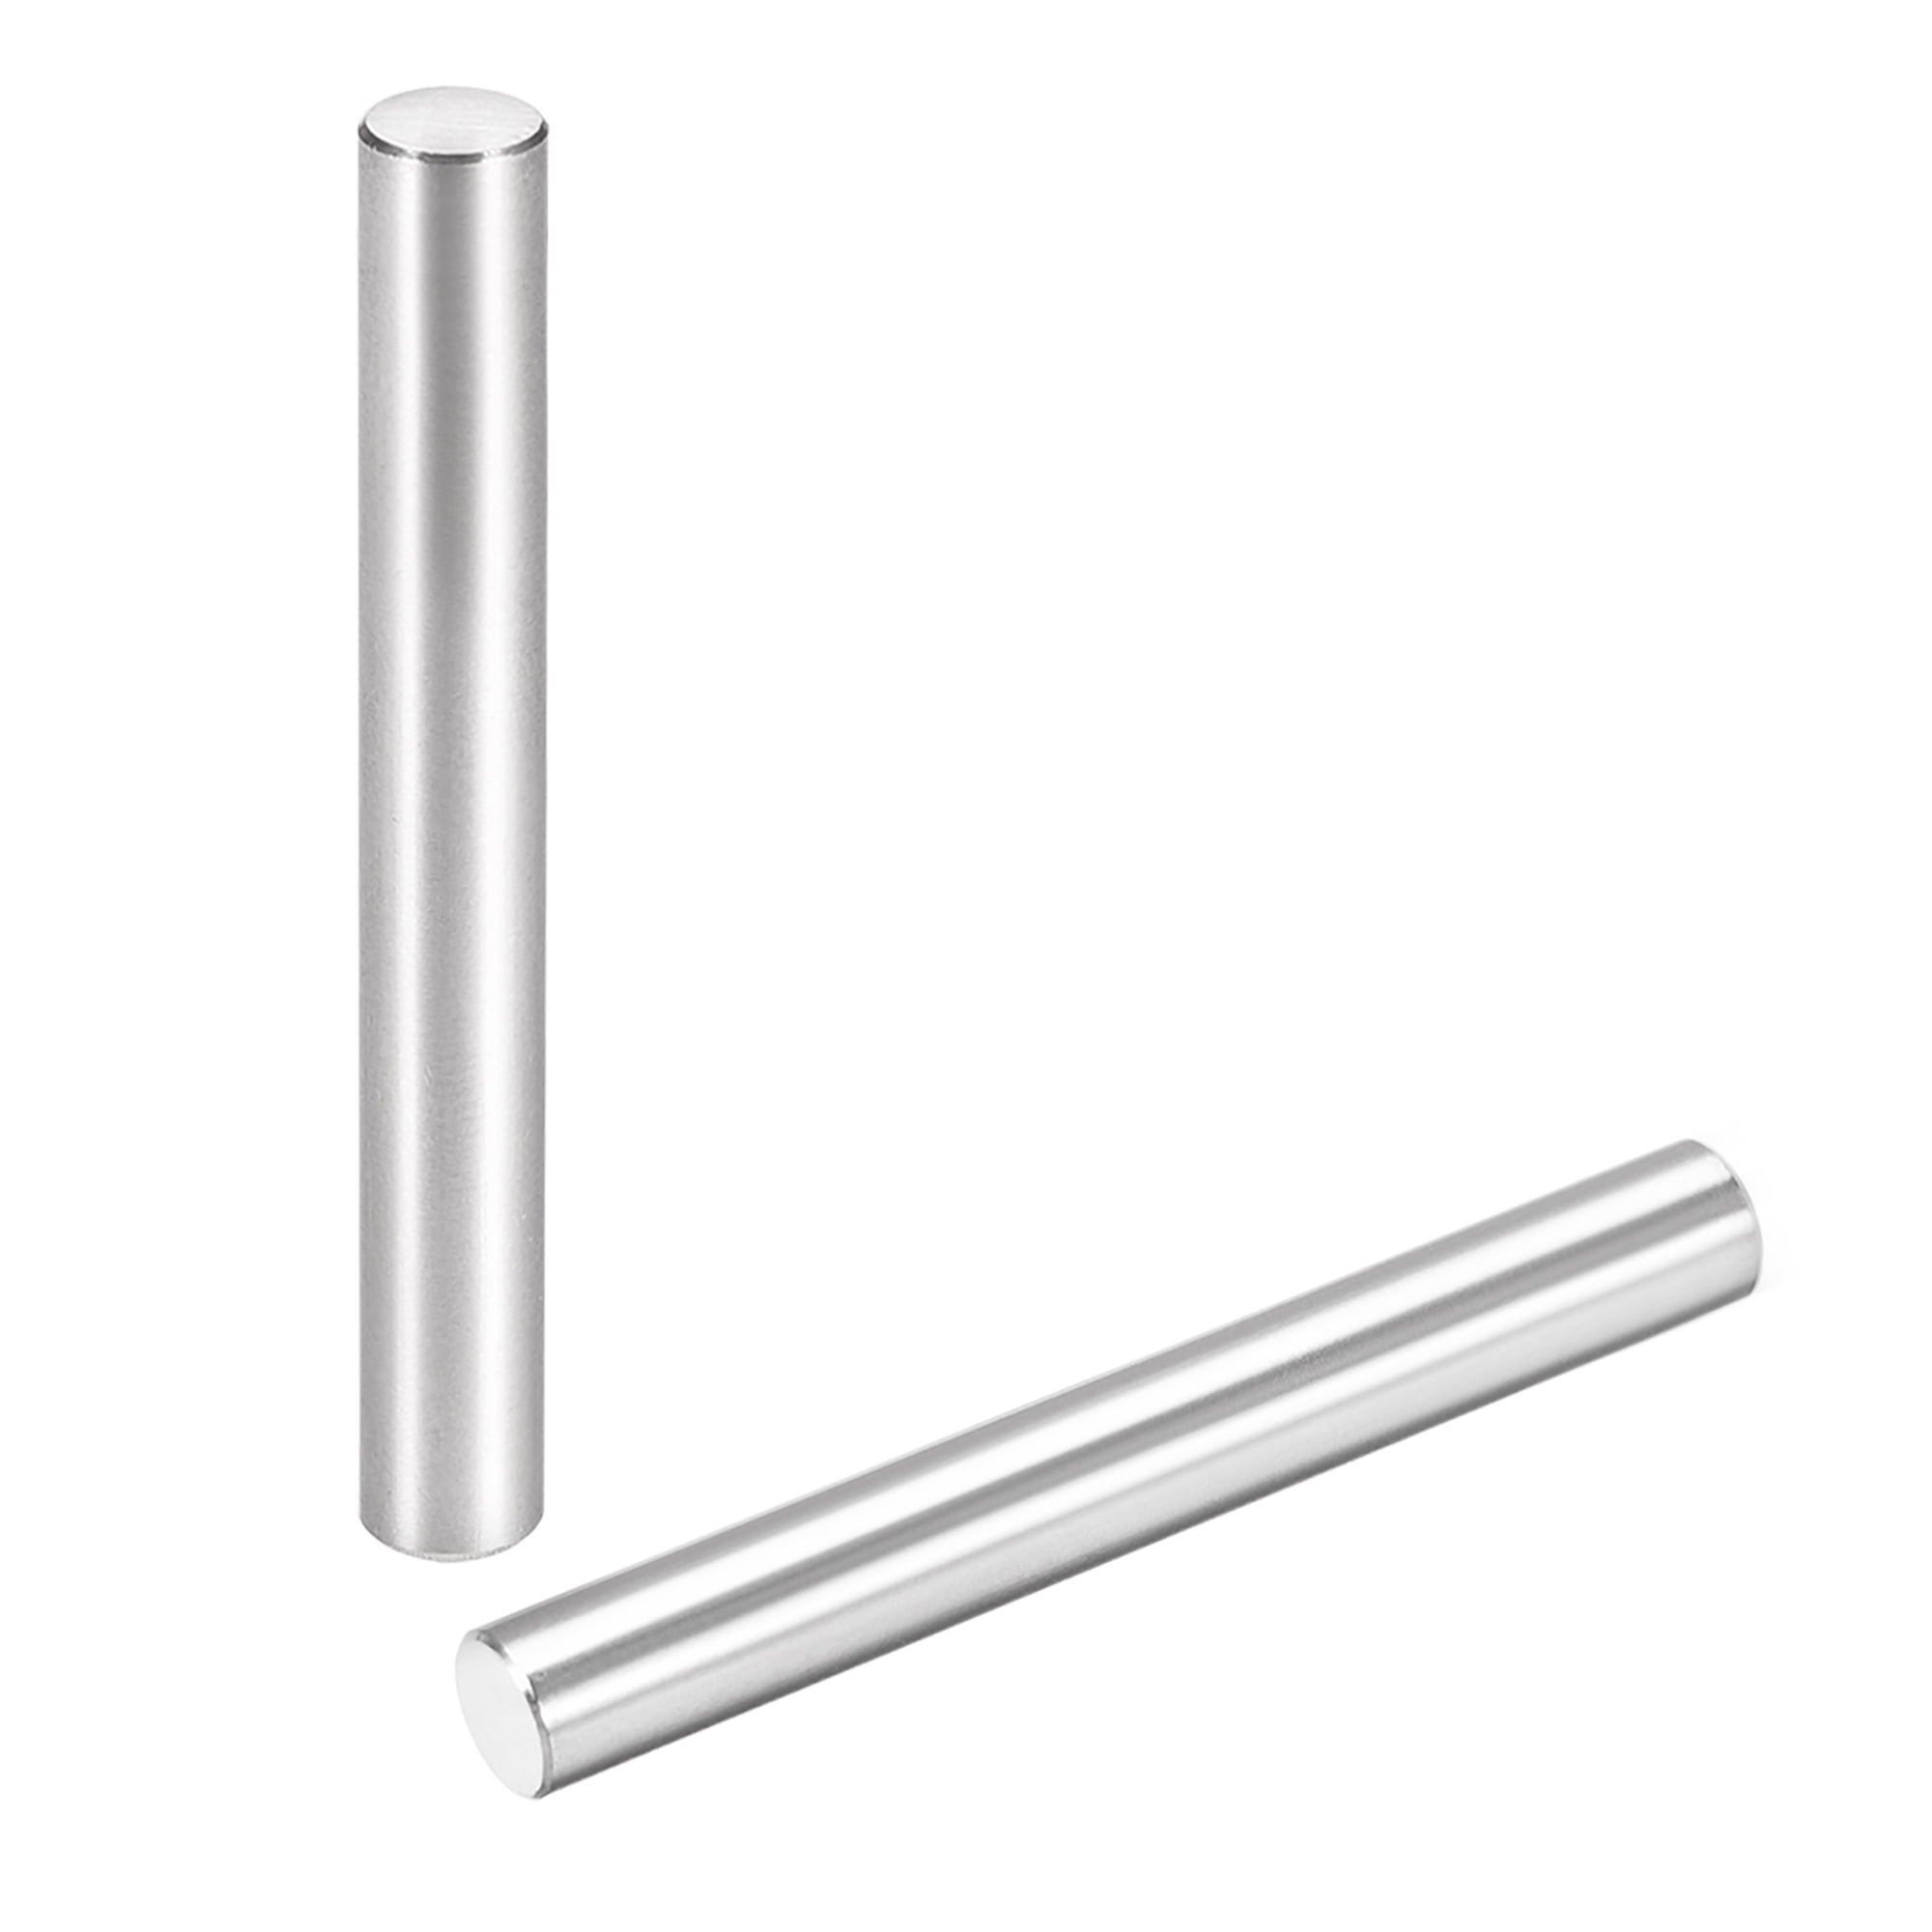 15 Pcs 6mm X 50mm Dowel Pin 304 Stainless Steel Cylindrical Shelf ...